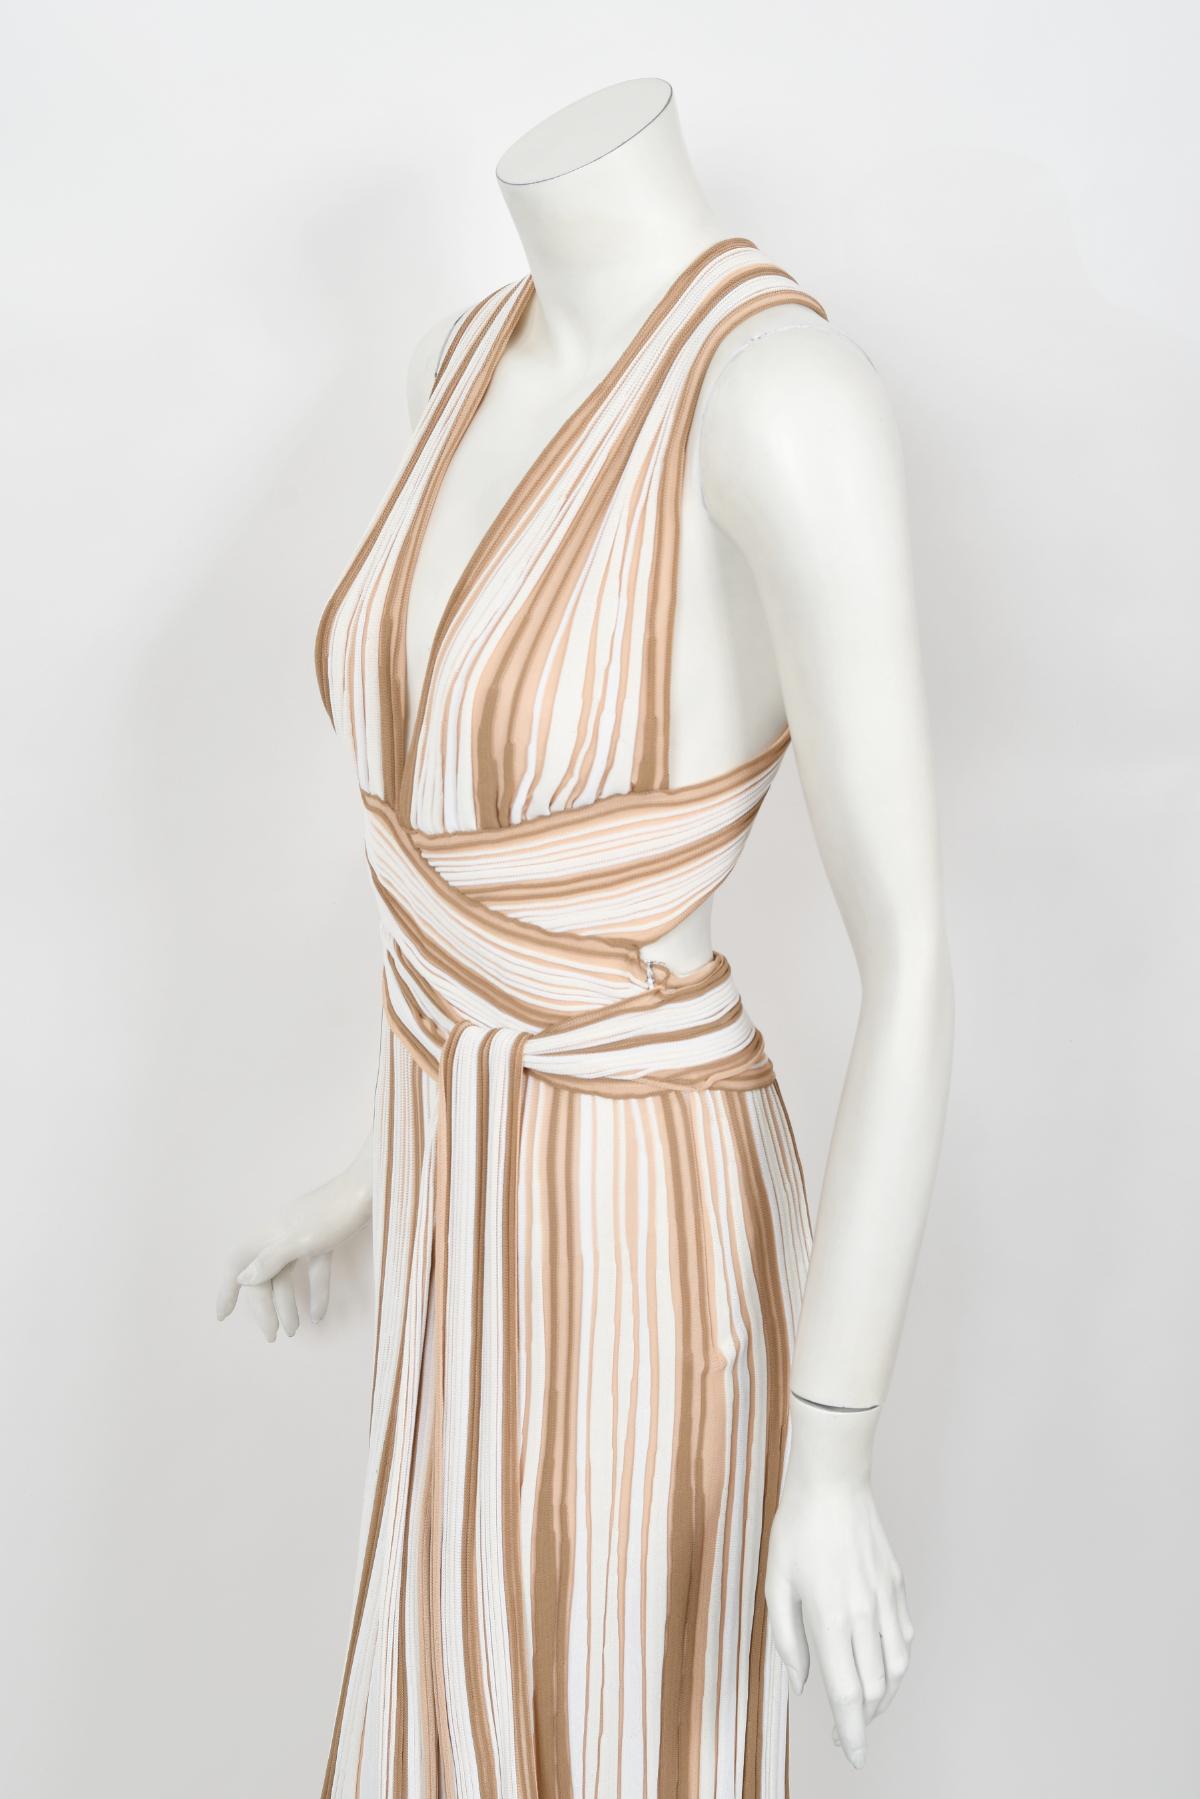 2002 Christian Dior by John Galliano Striped Stretch Knit Low-Plunge Maxi Dress For Sale 2